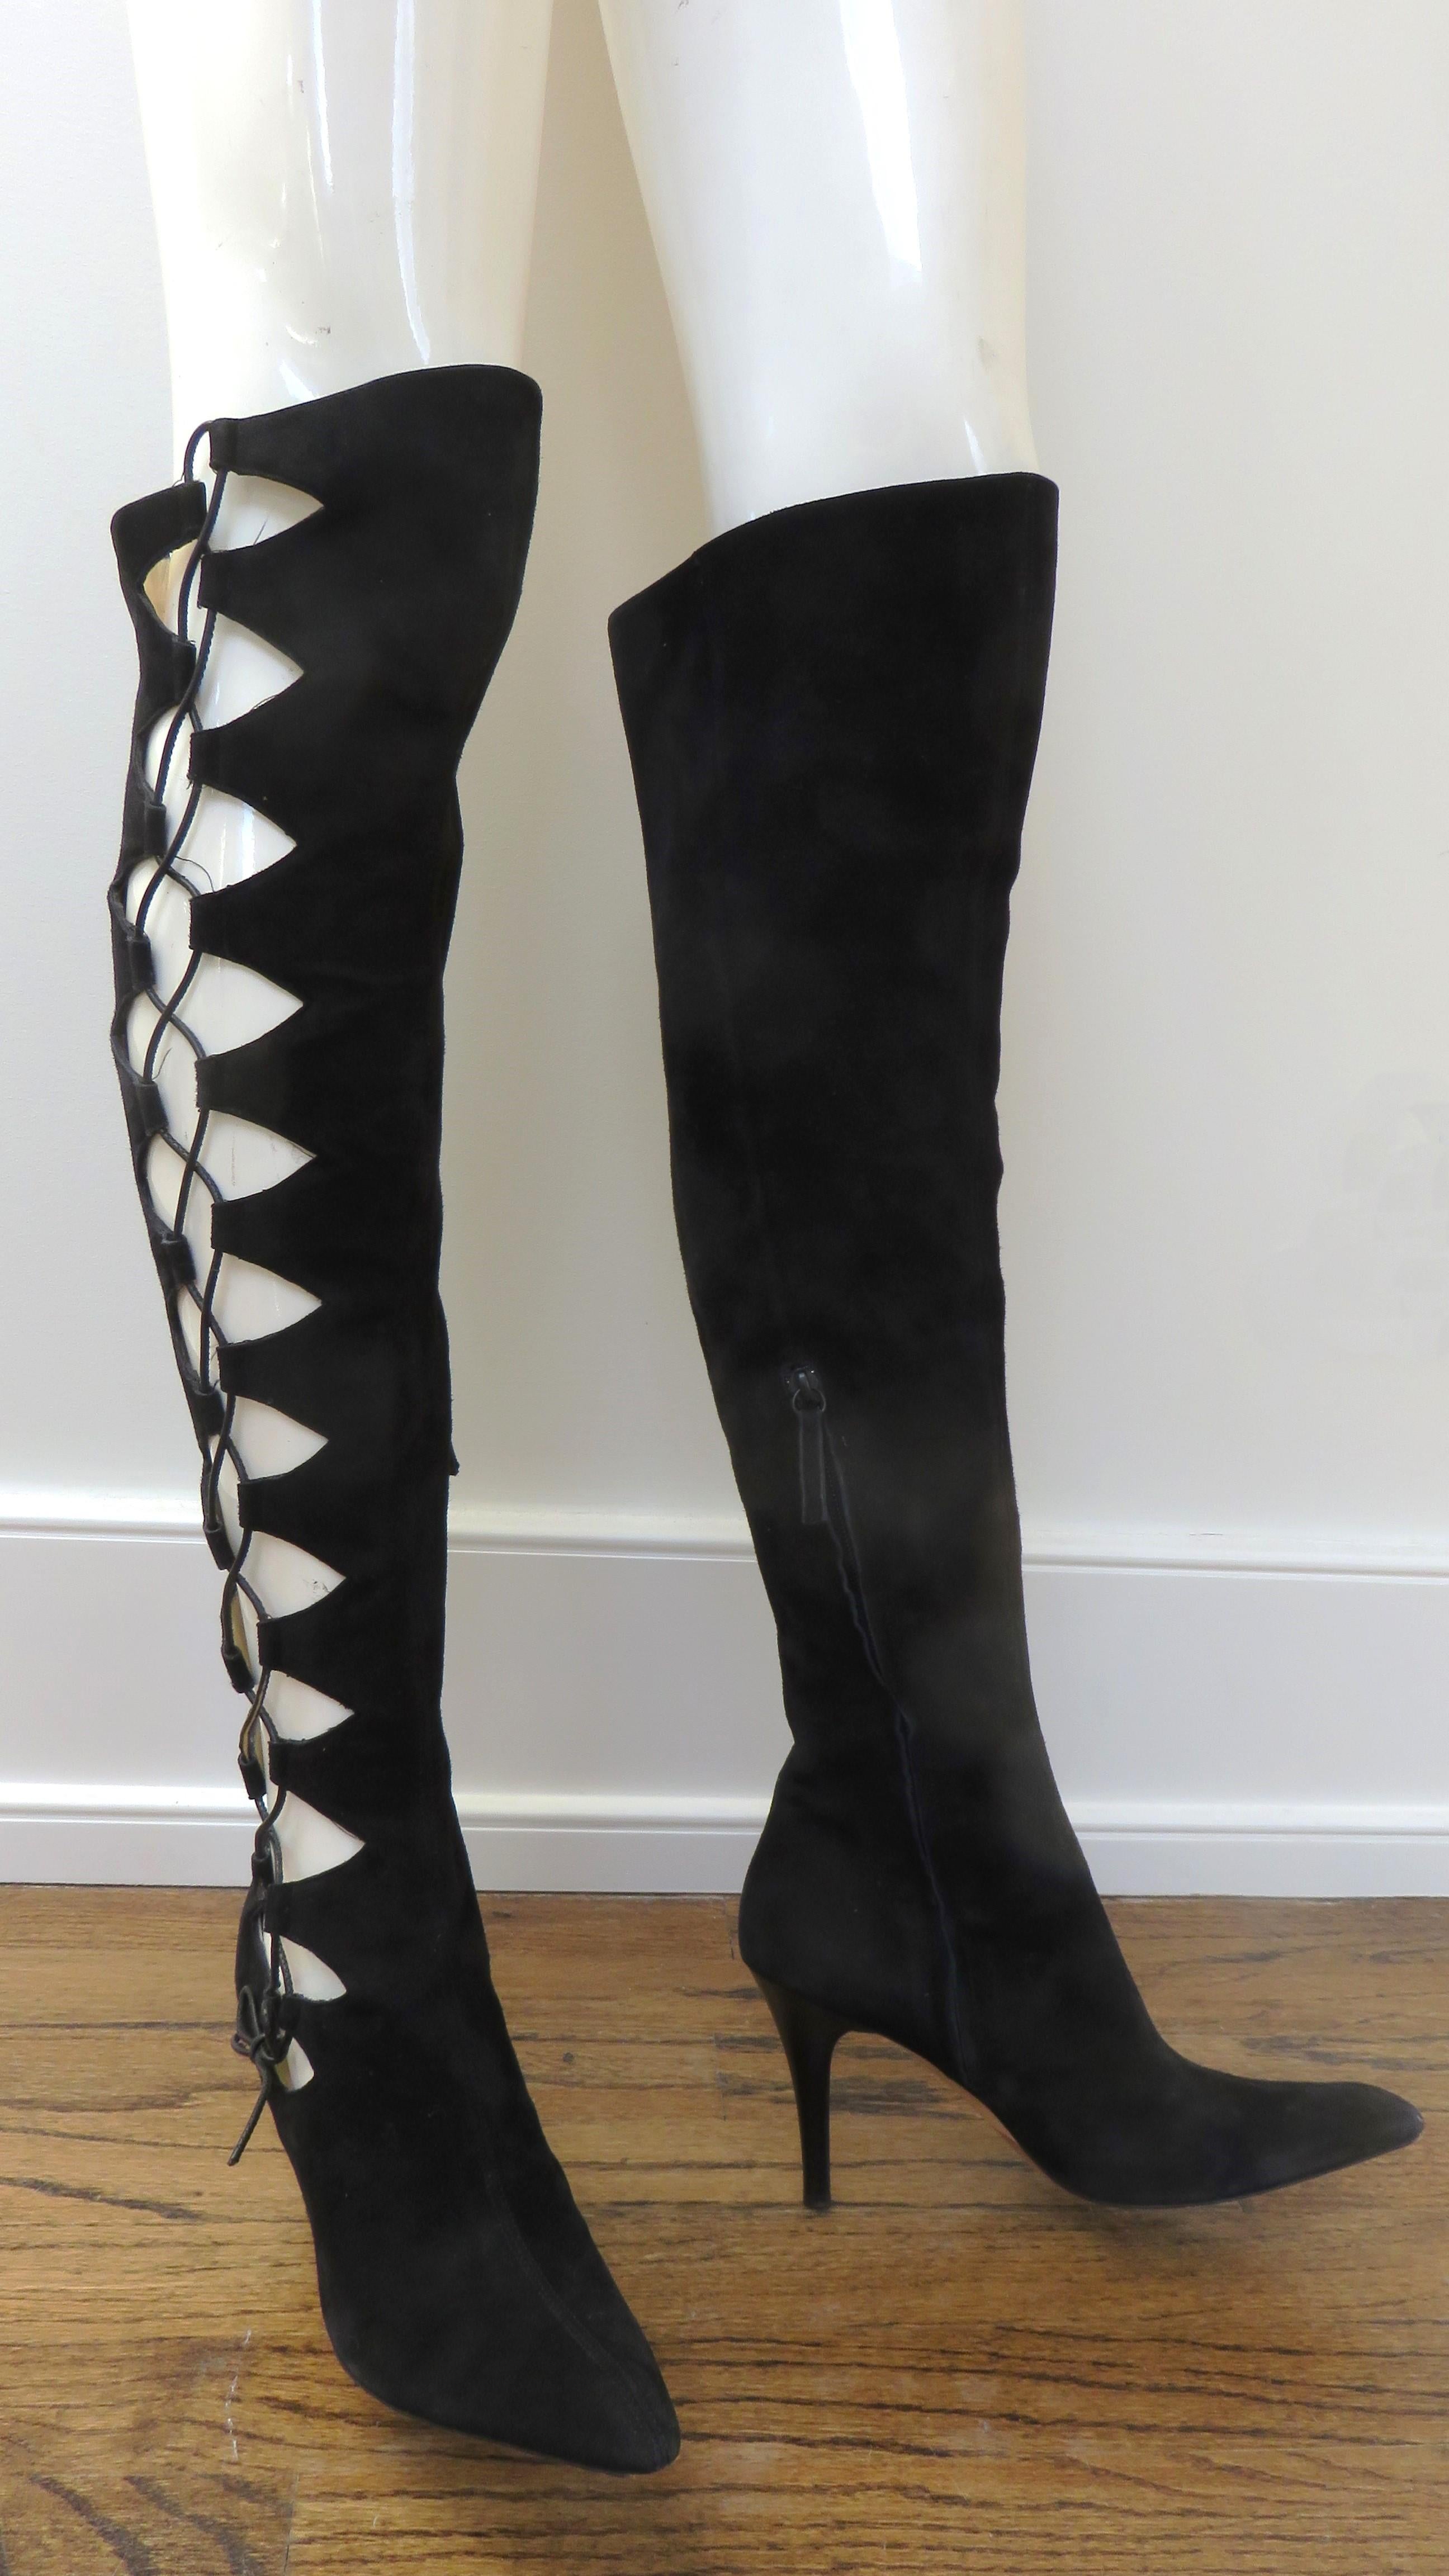 Giuseppe Zanotti Black Suede Lace up Cutout Thigh High Boots Size 9 In Good Condition For Sale In Water Mill, NY